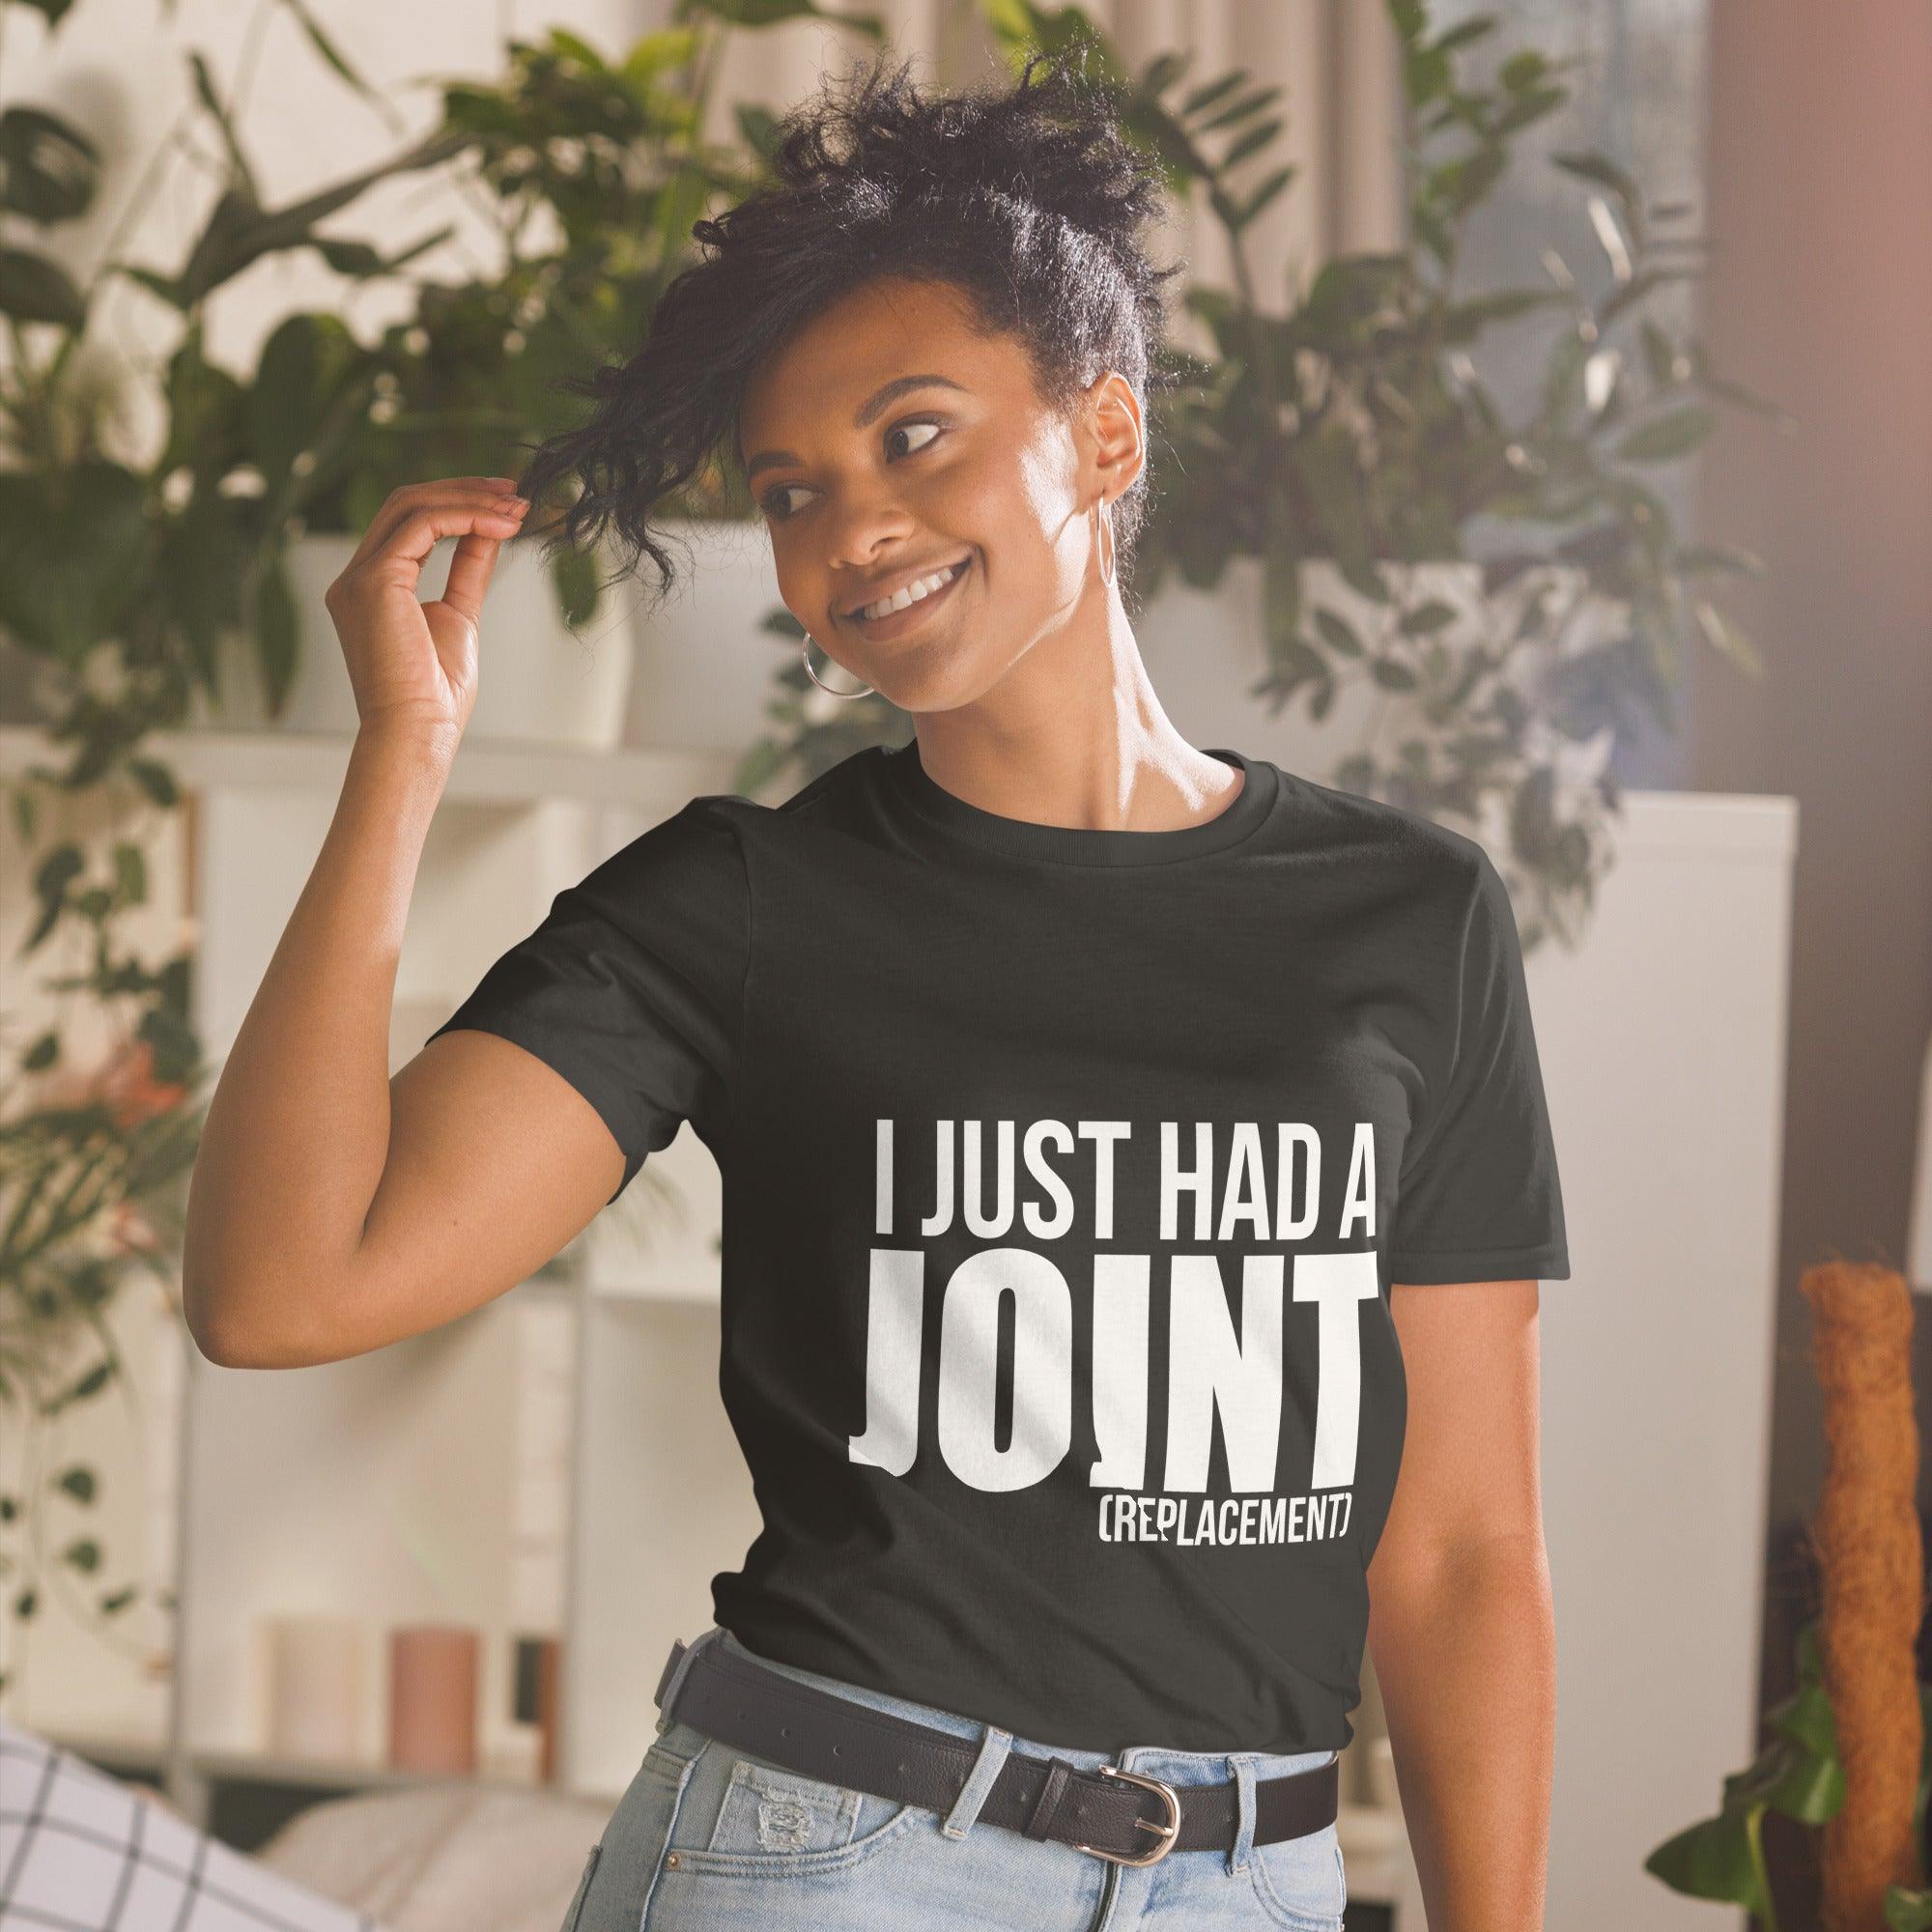 I Just Had A Joint (Replacement) - Short-Sleeve Unisex T-Shirt - 6941040_474 I Just Had A Joint (Replacement) - Short-Sleeve Unisex T-Shirt - undefined by Supply Physical Therapy Apparel